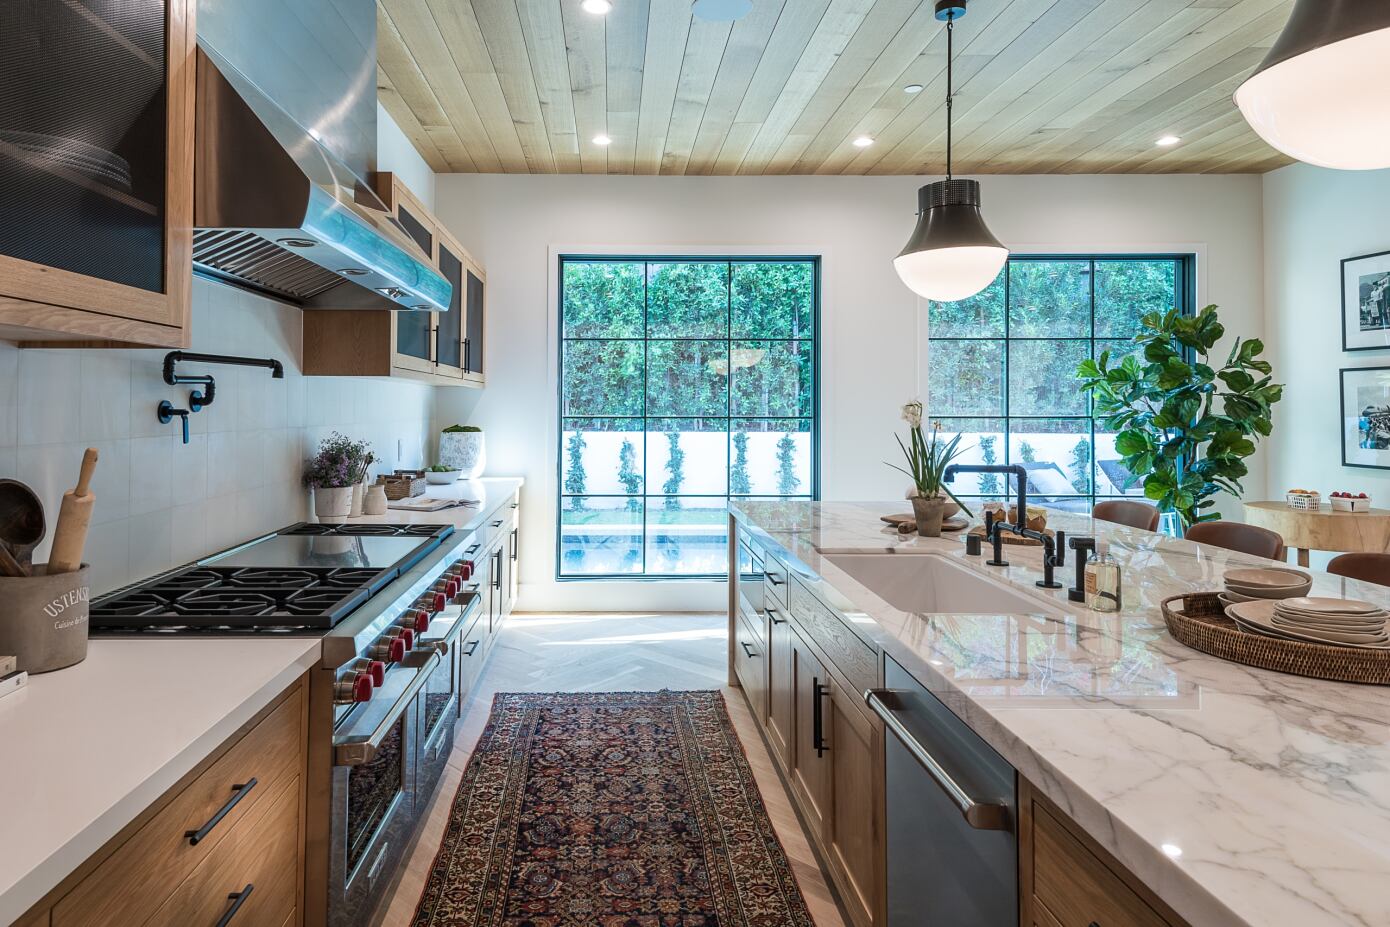 How tо Design Your Kitchen for Summer